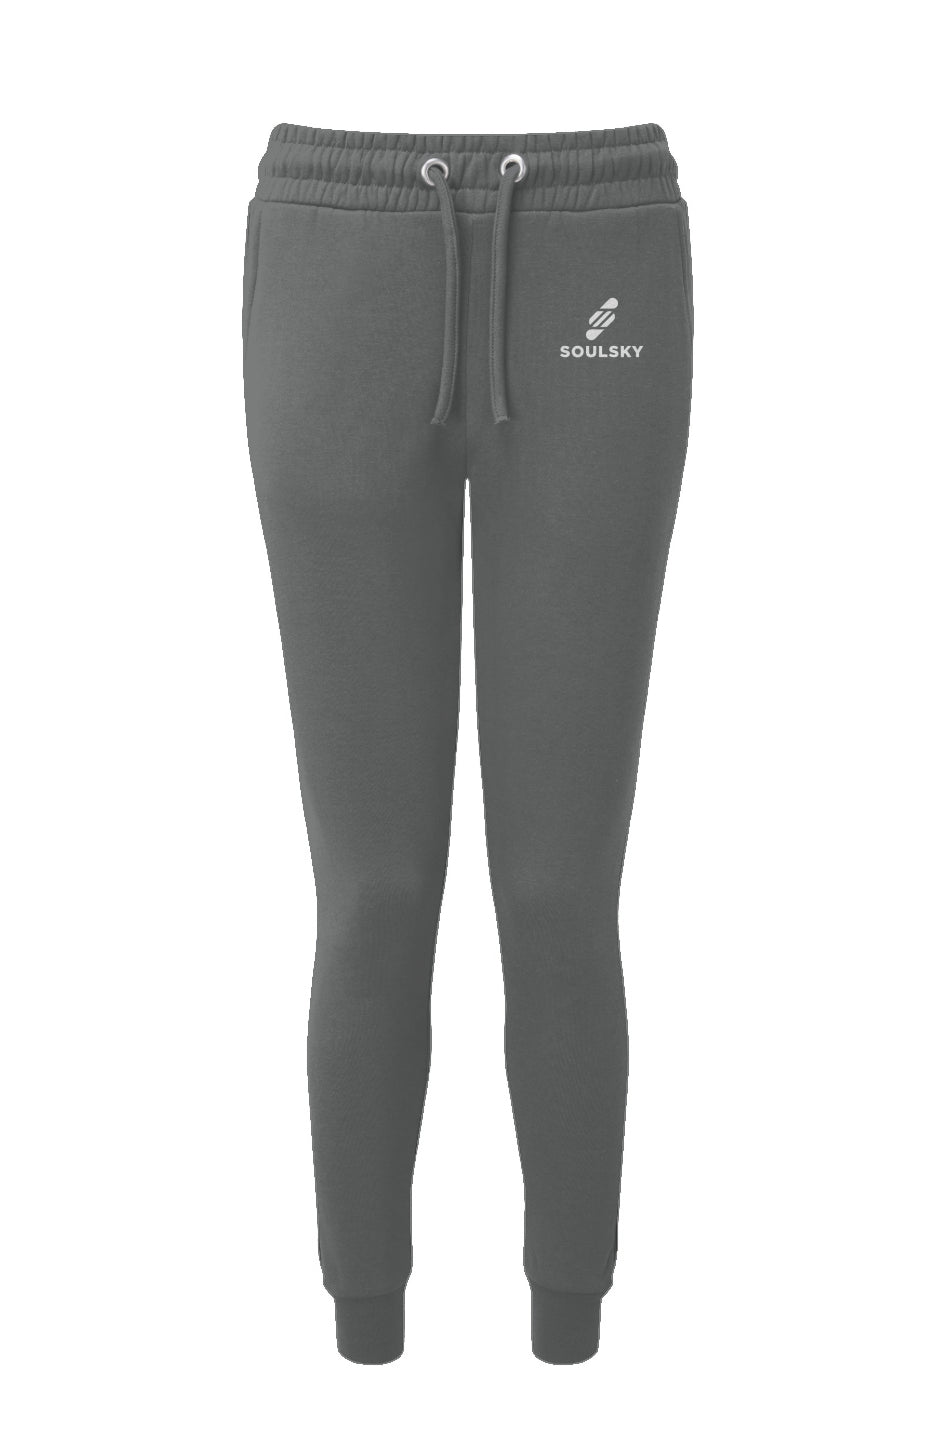 Womens' Yoga Fitted Jogger (Charcoal Gray)